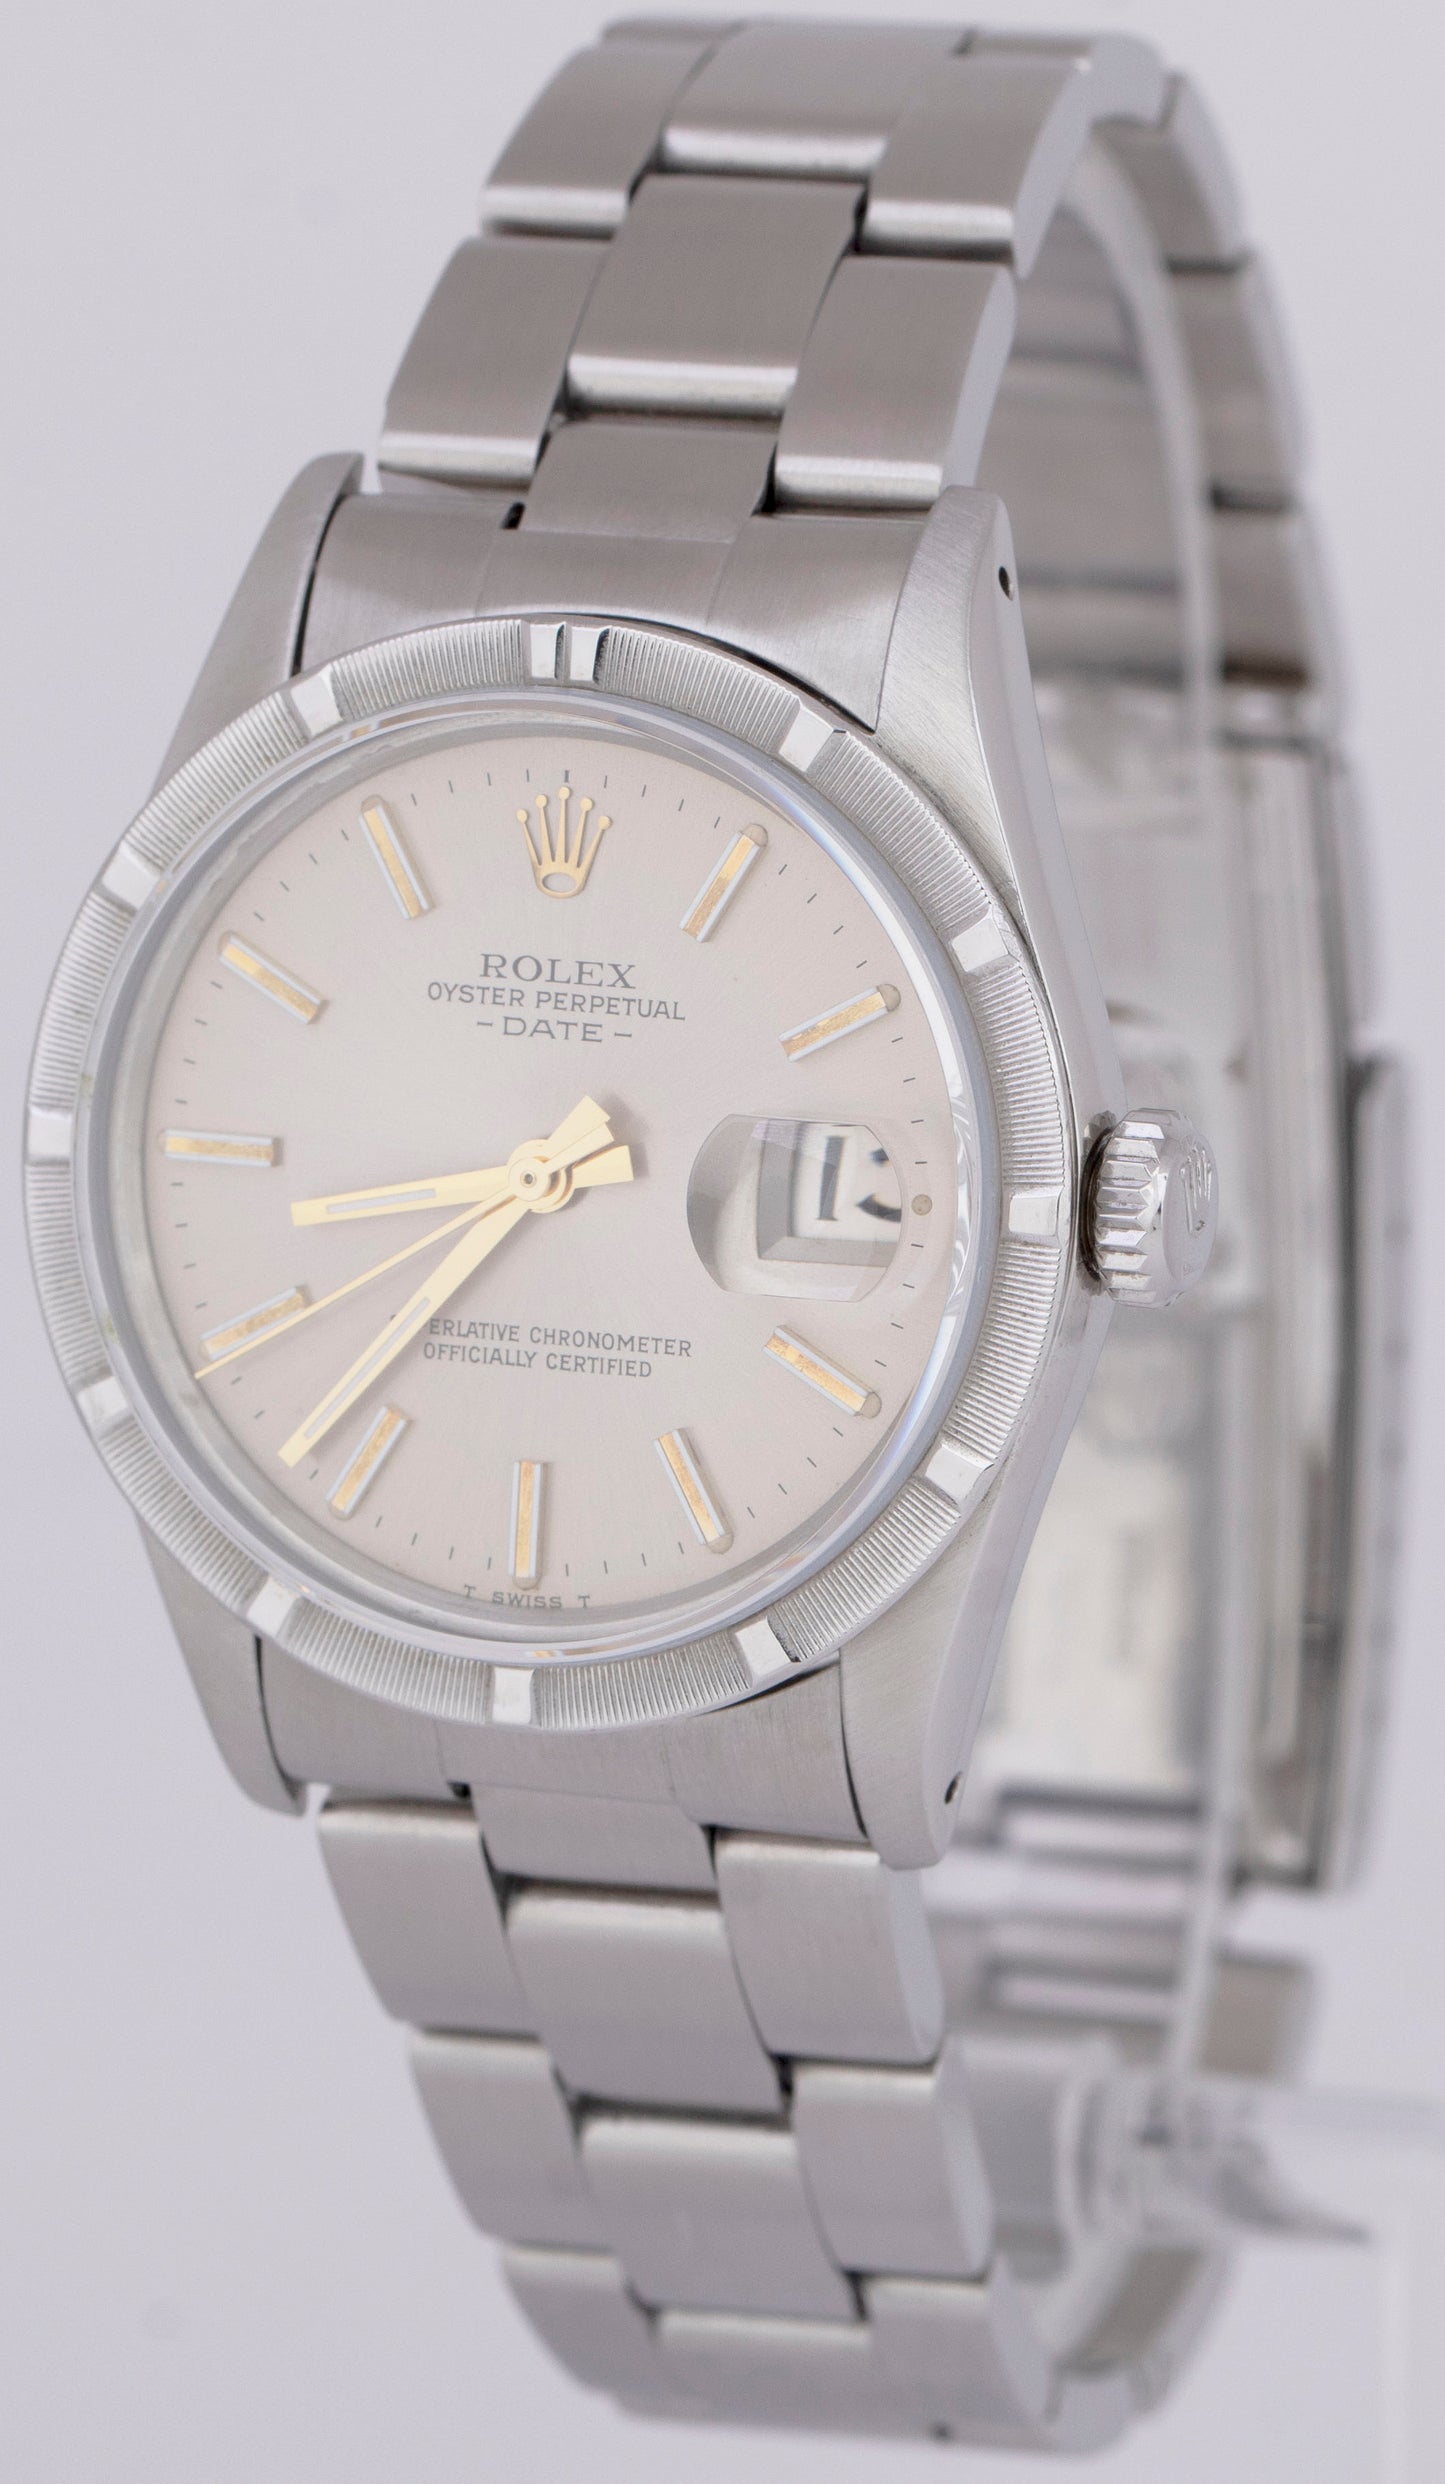 MINT 1981 Rolex Oyster Perpetual Date Quickset Silver 15010 34mm Stainless Watch